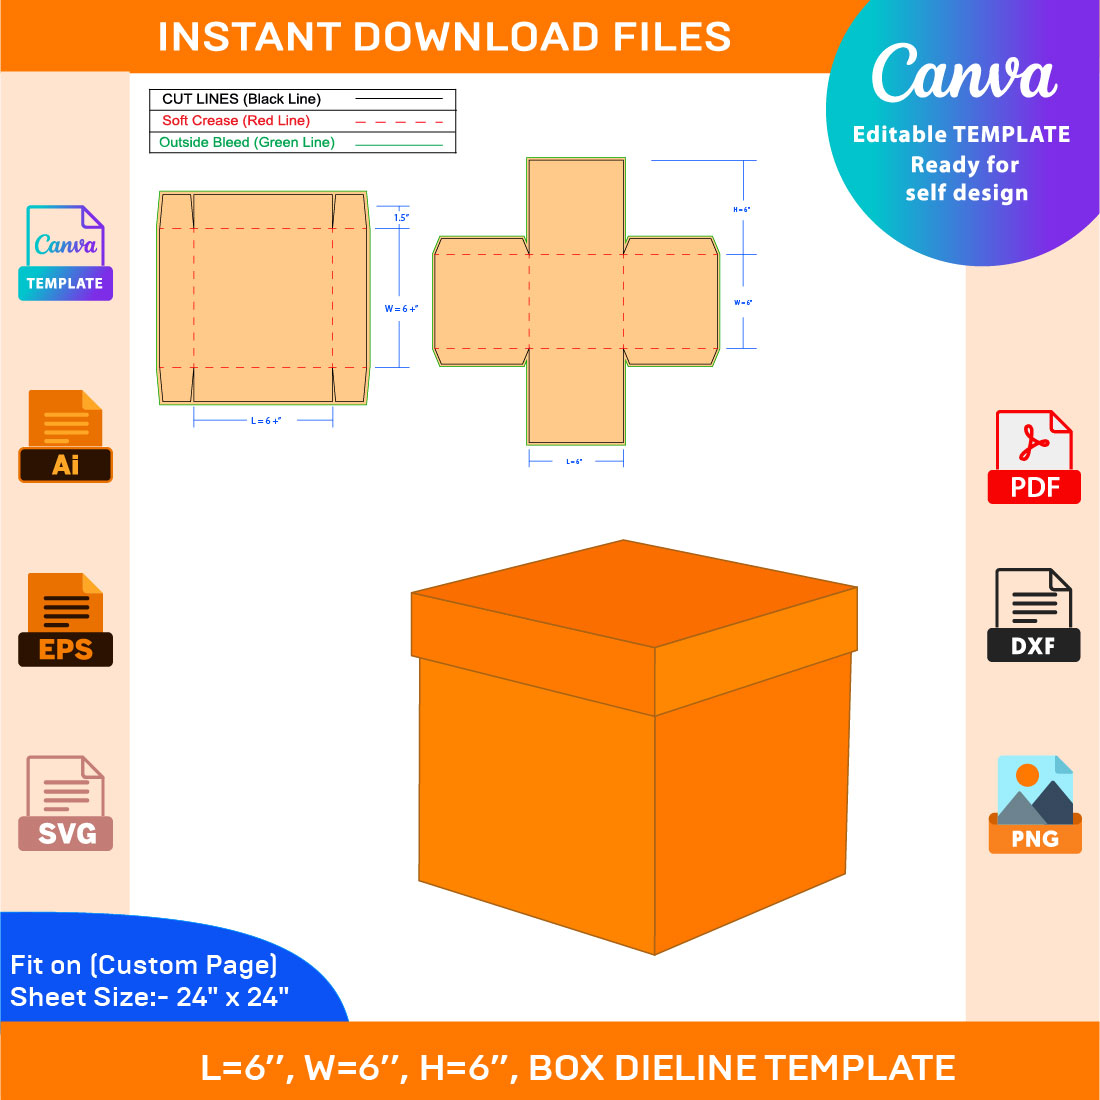 Gift Box, Box With Lid, Dieline Template, SVG, EPS, PDF, DXF, Ai, PNG, JPEG cover image.